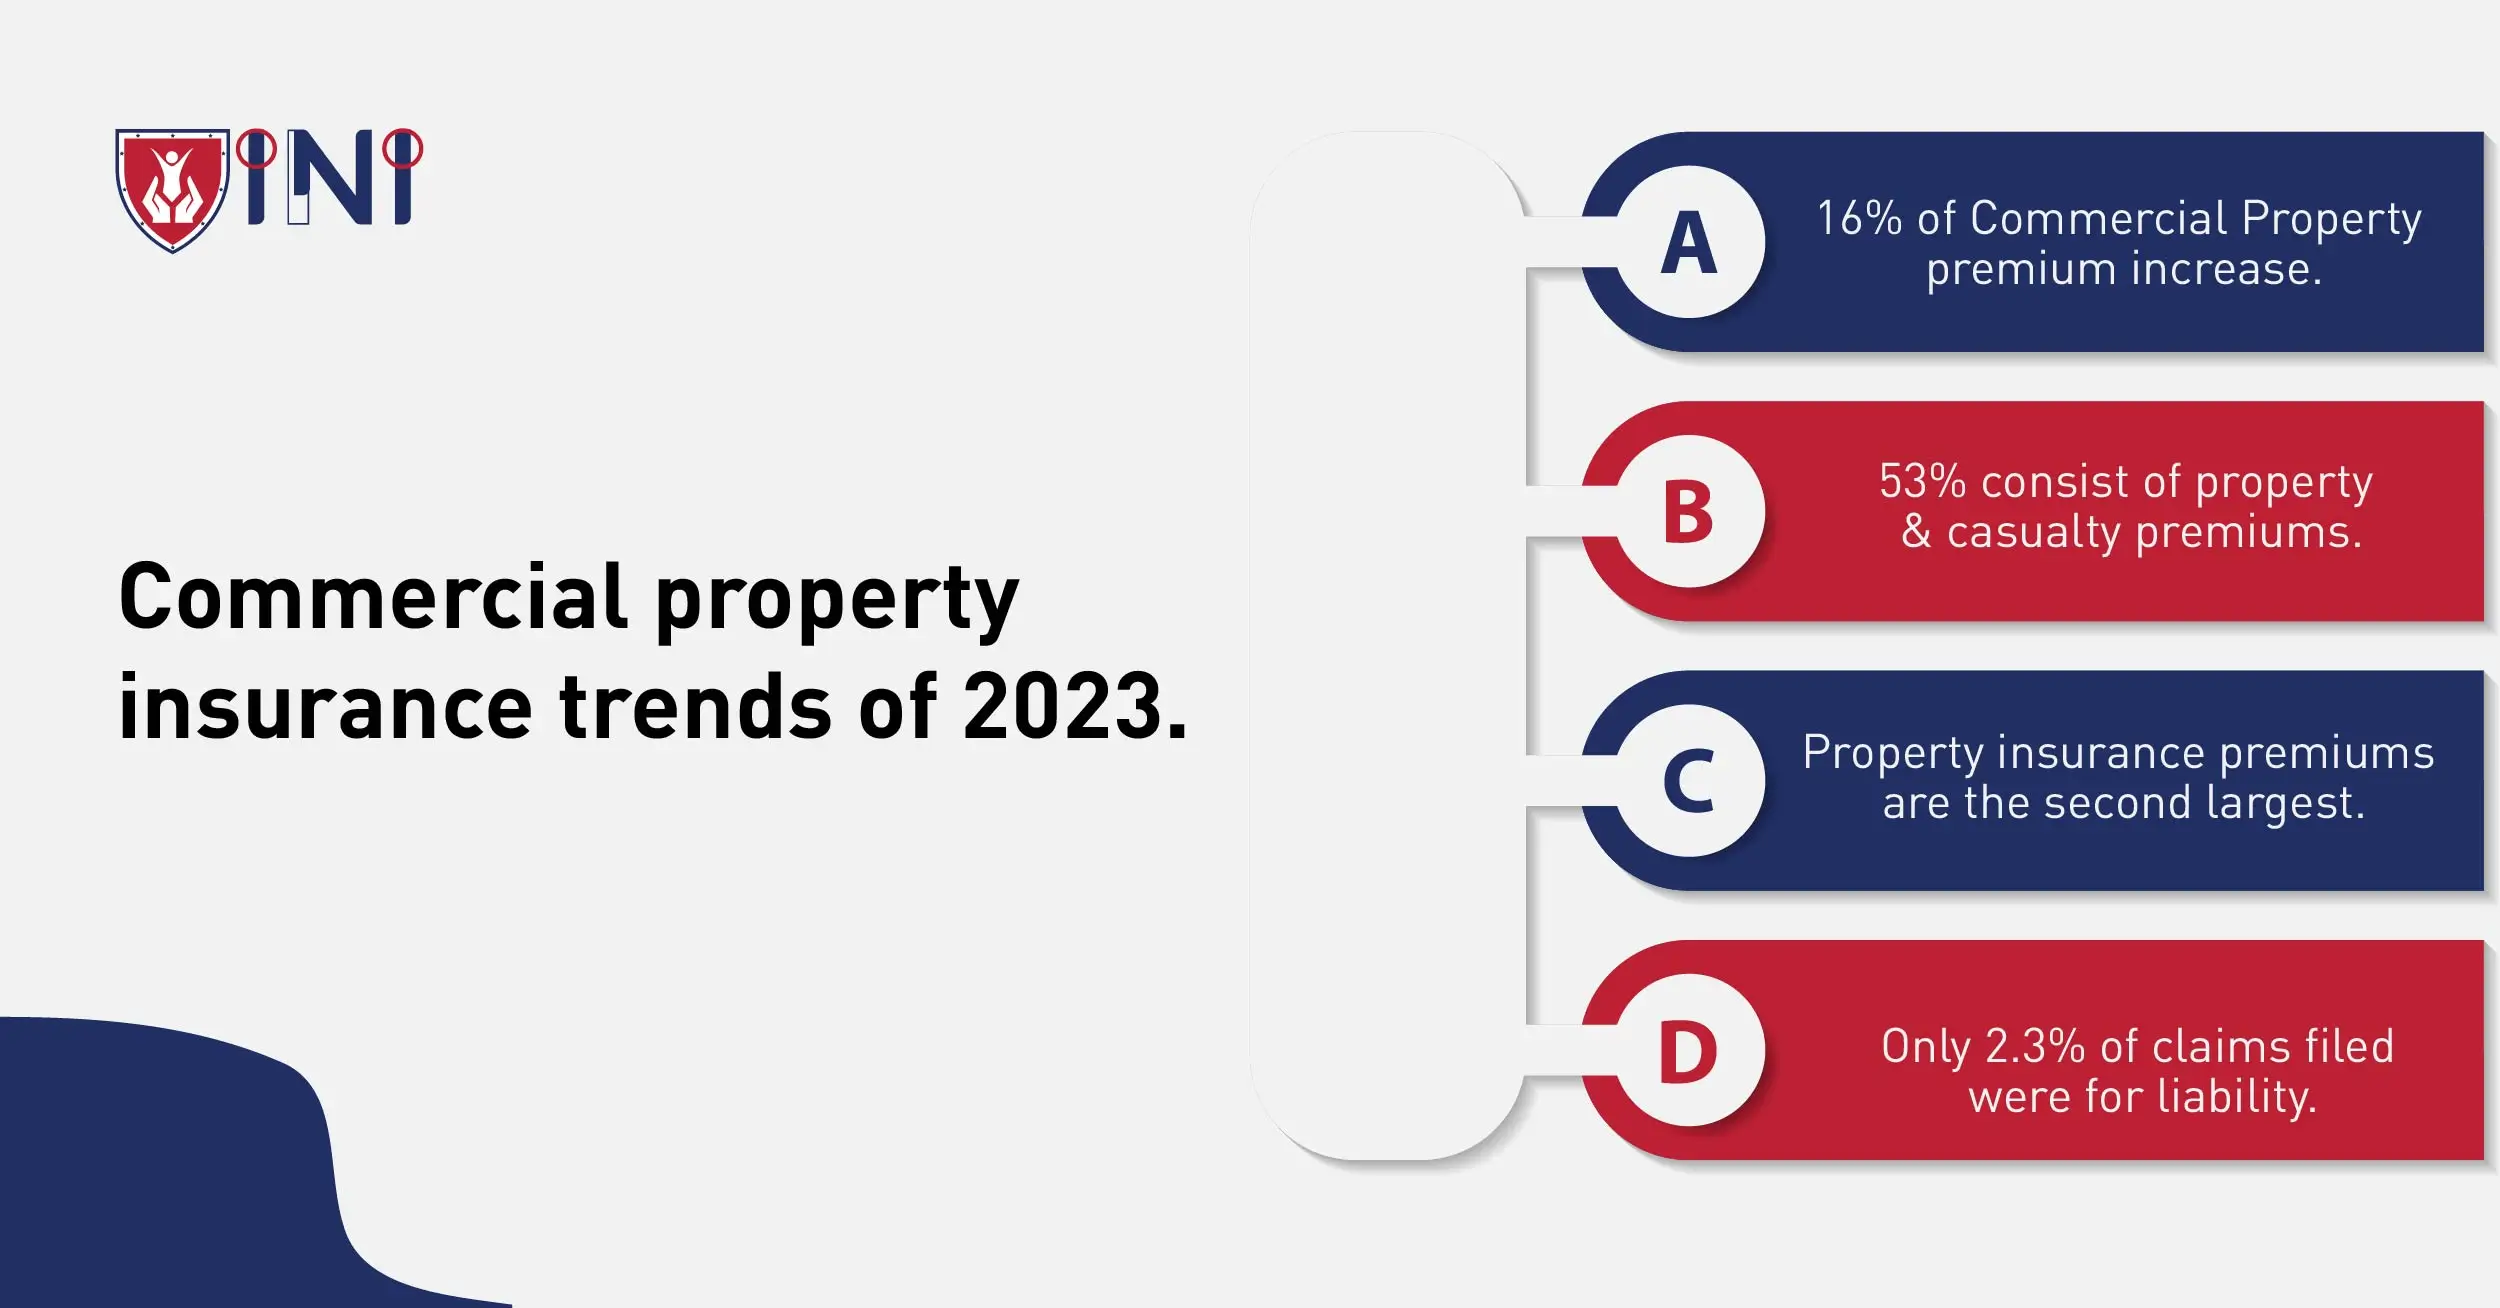 Commercial property insurance trends 2023